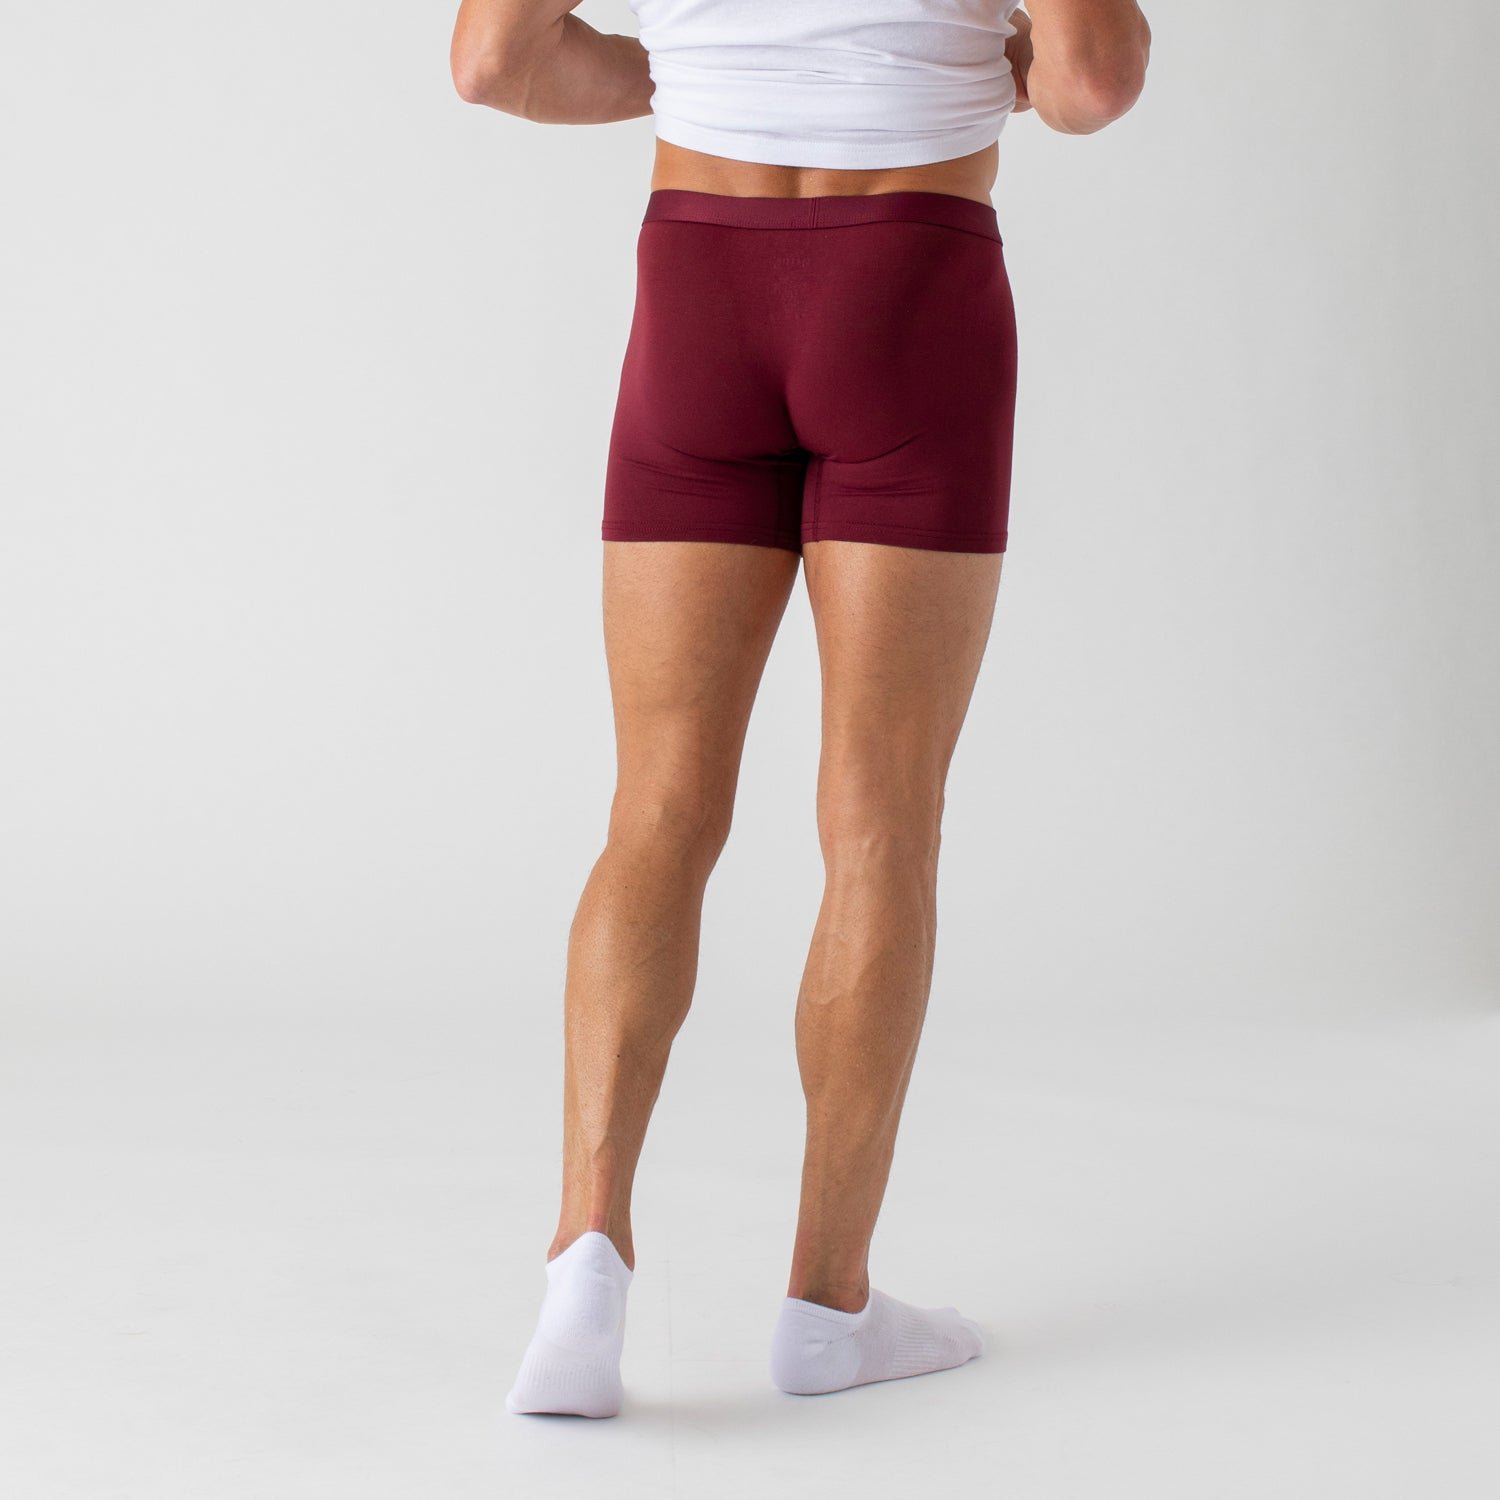 The Burgundy Brief 6-Pack